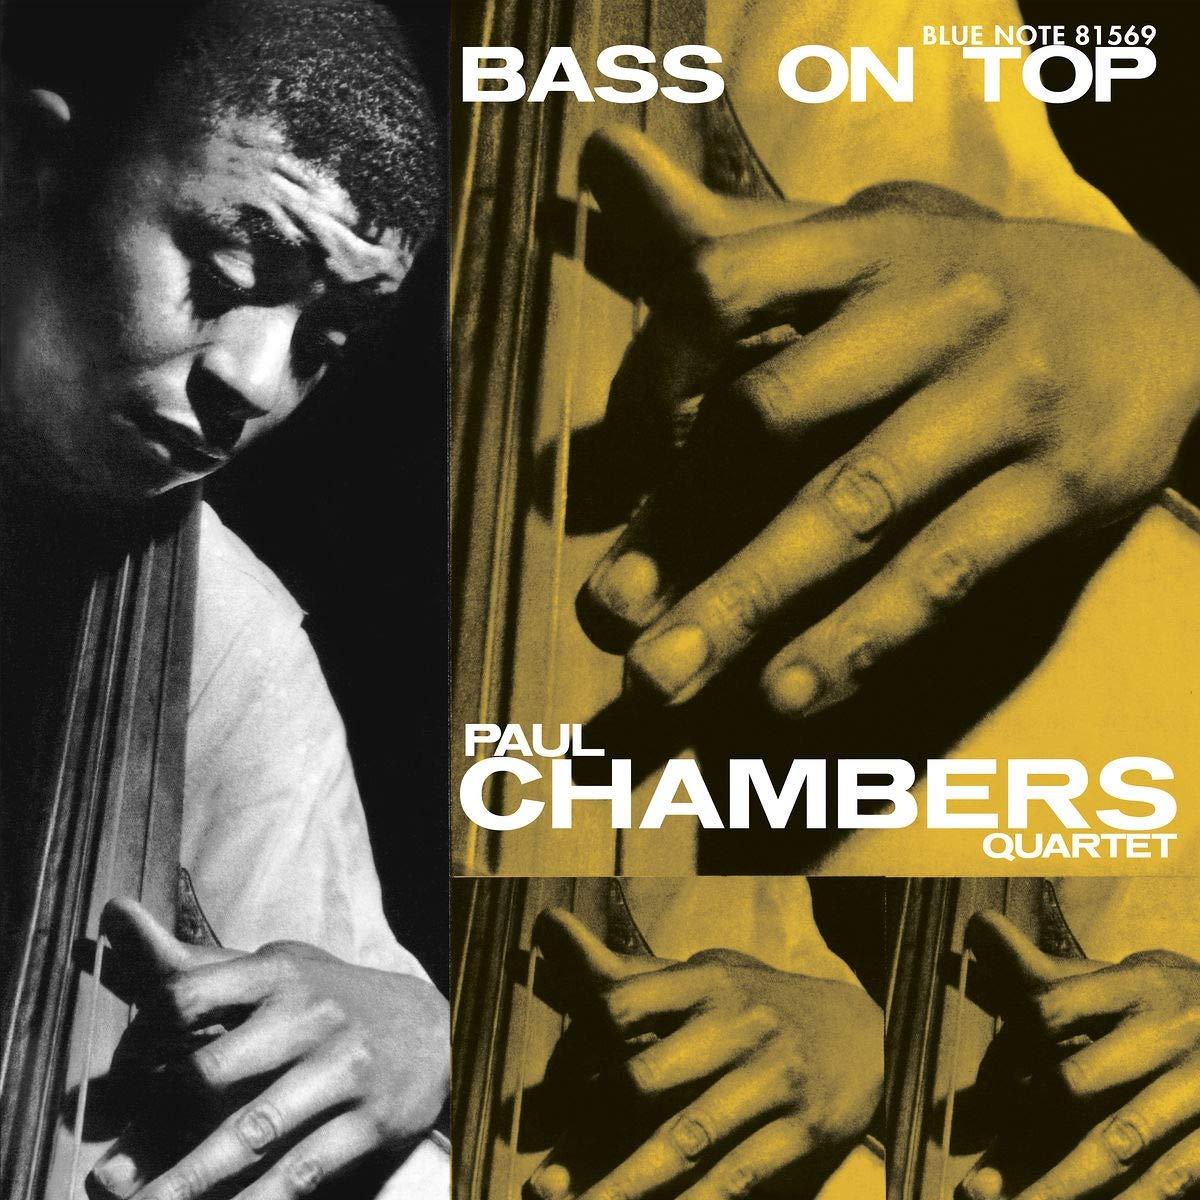 Paul Chambers "Bass On Top" [All Analog 180g][Blue Note Tone Poet Series]